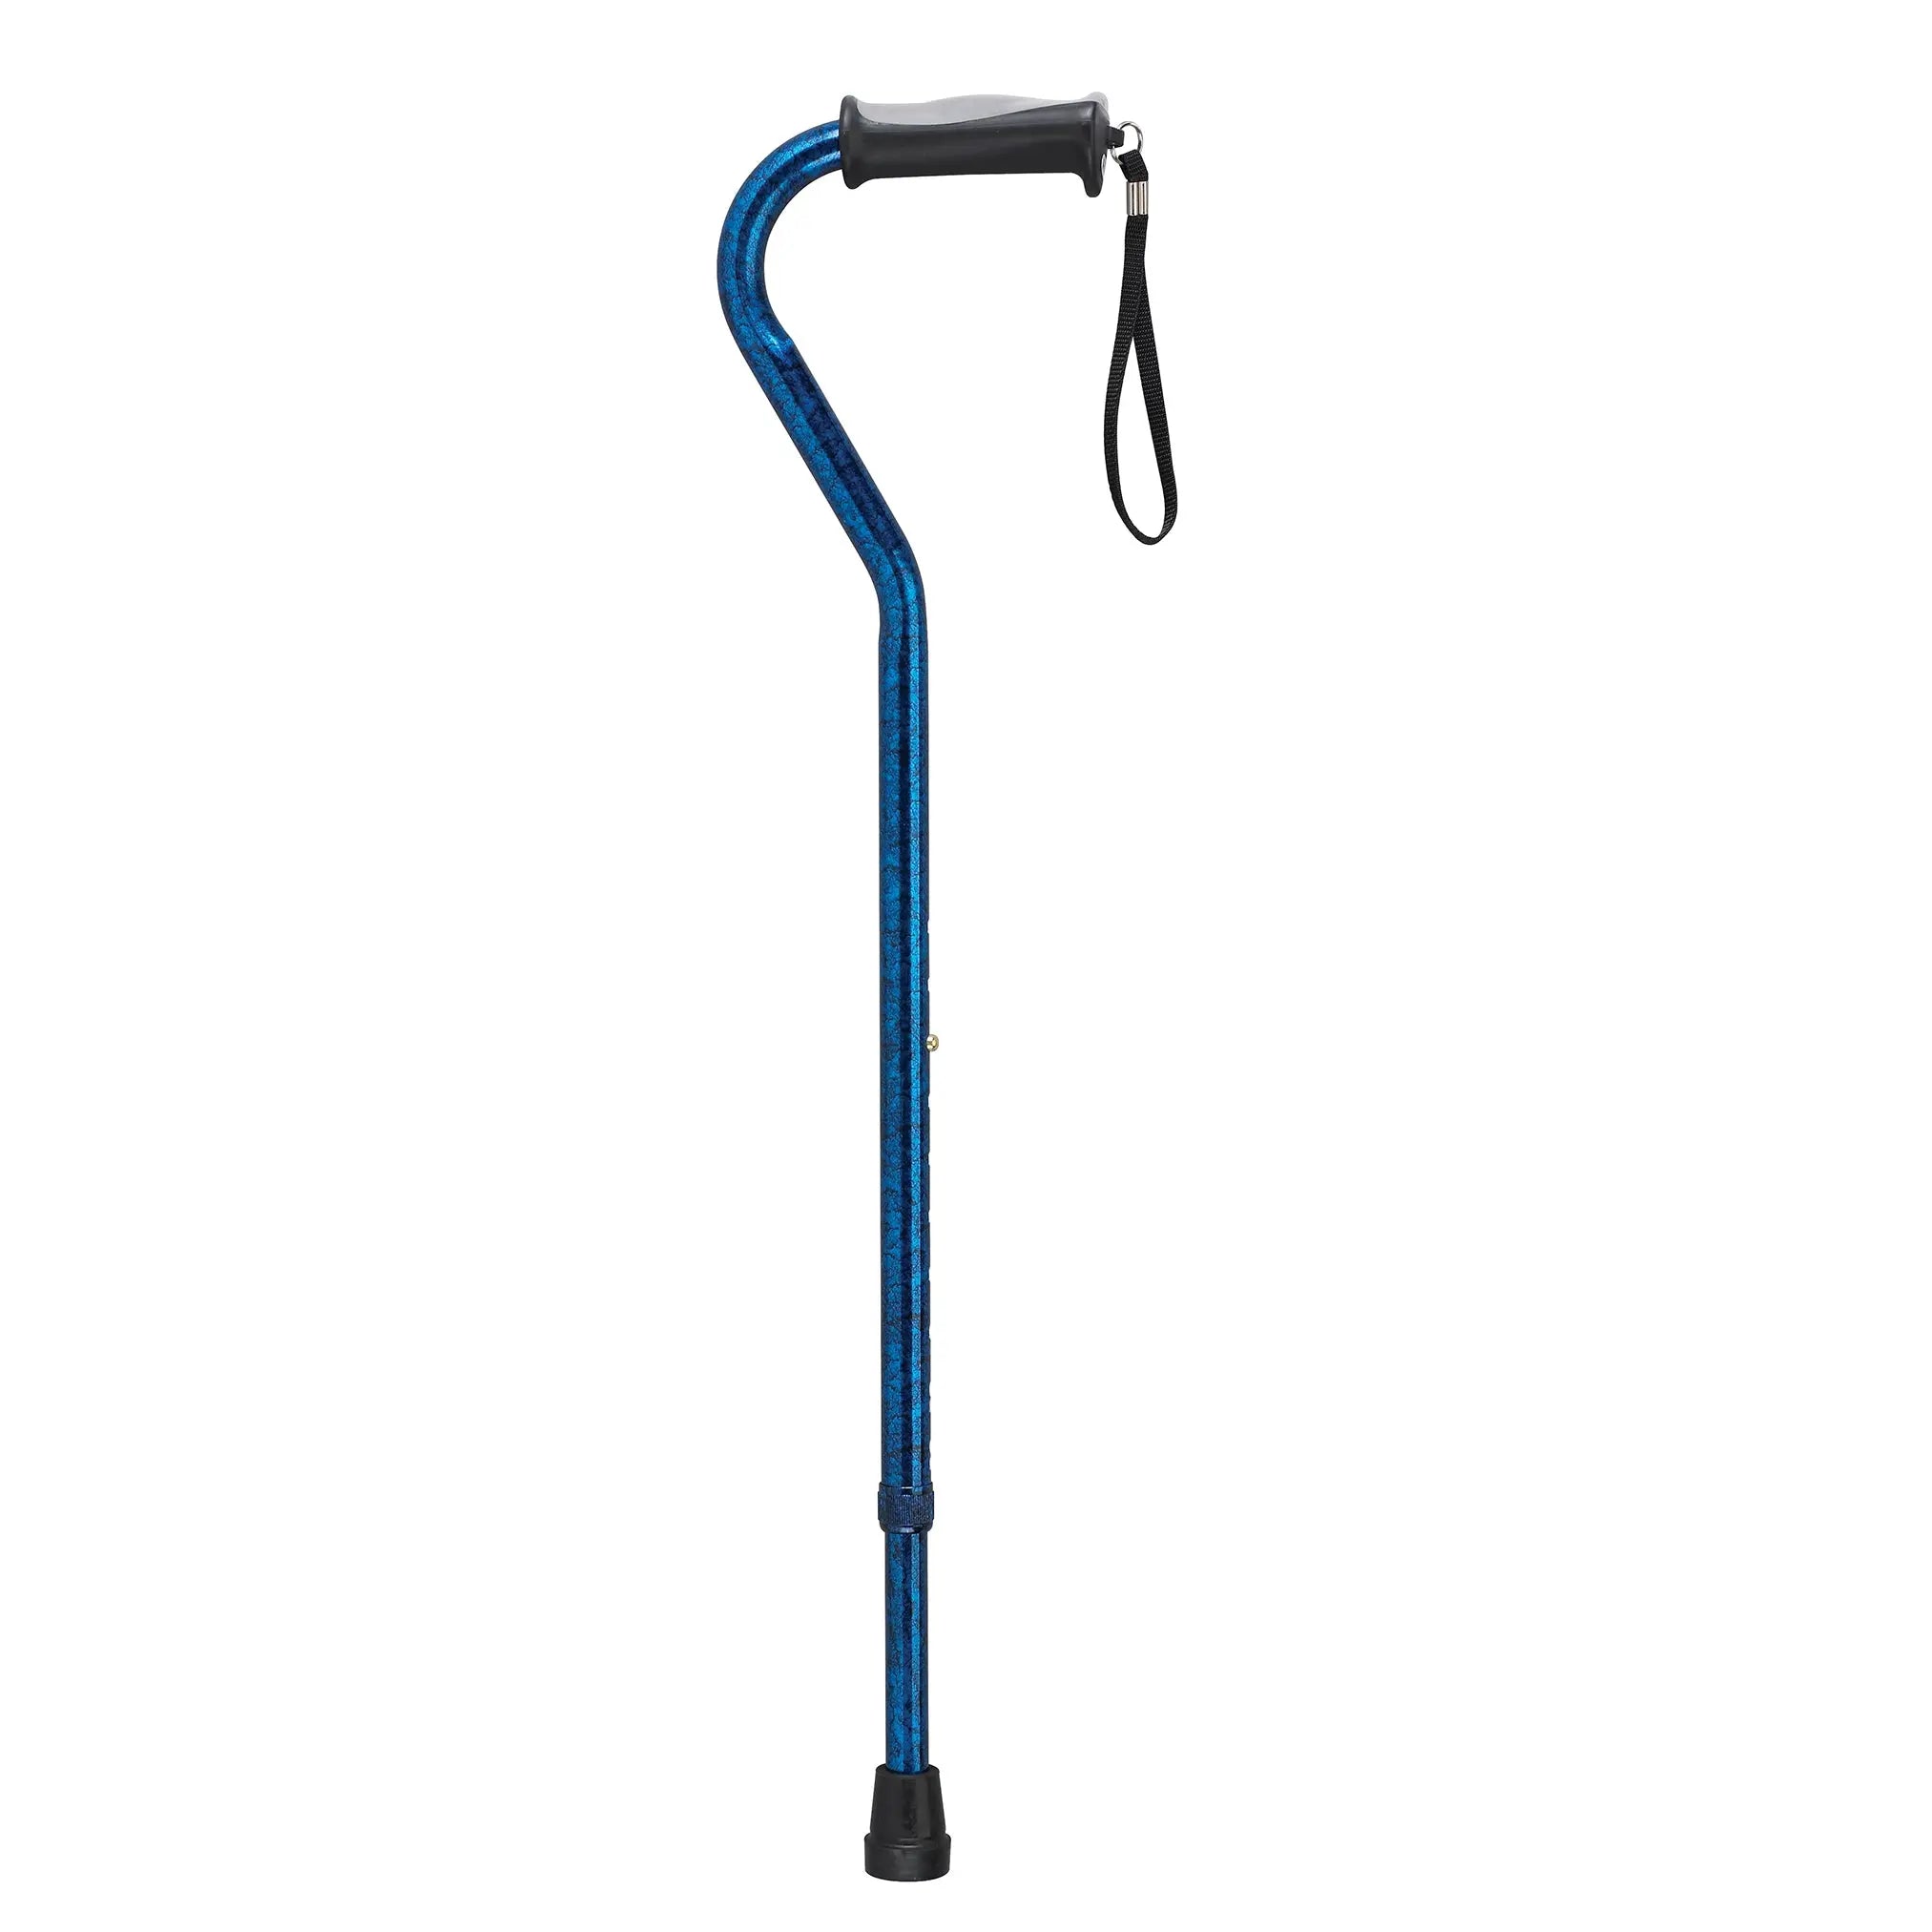 Adjustable Height Offset Handle Cane with Gel Hand Grip - Home Health Store Inc